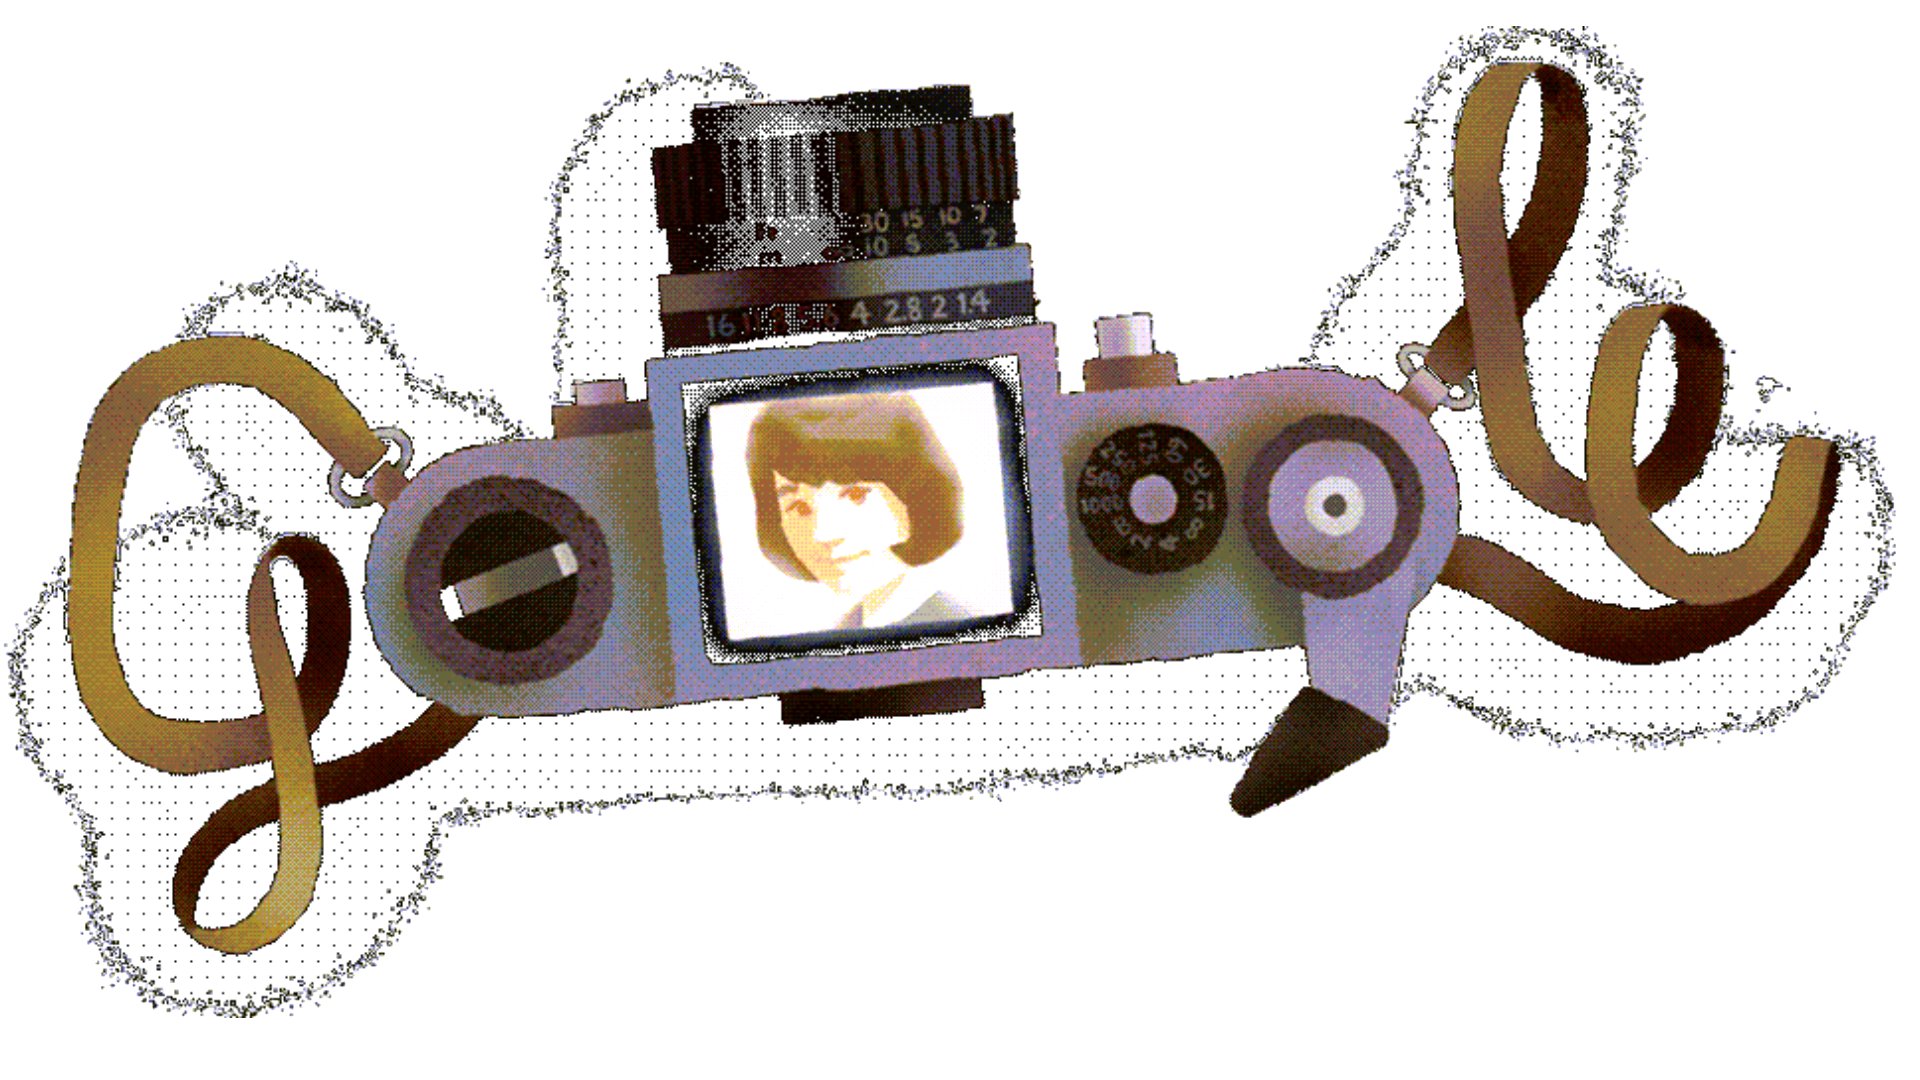 Today's Google Doodle: Who is Zofia Nasierowska, the photographer celebrated in today's Google Doodle?